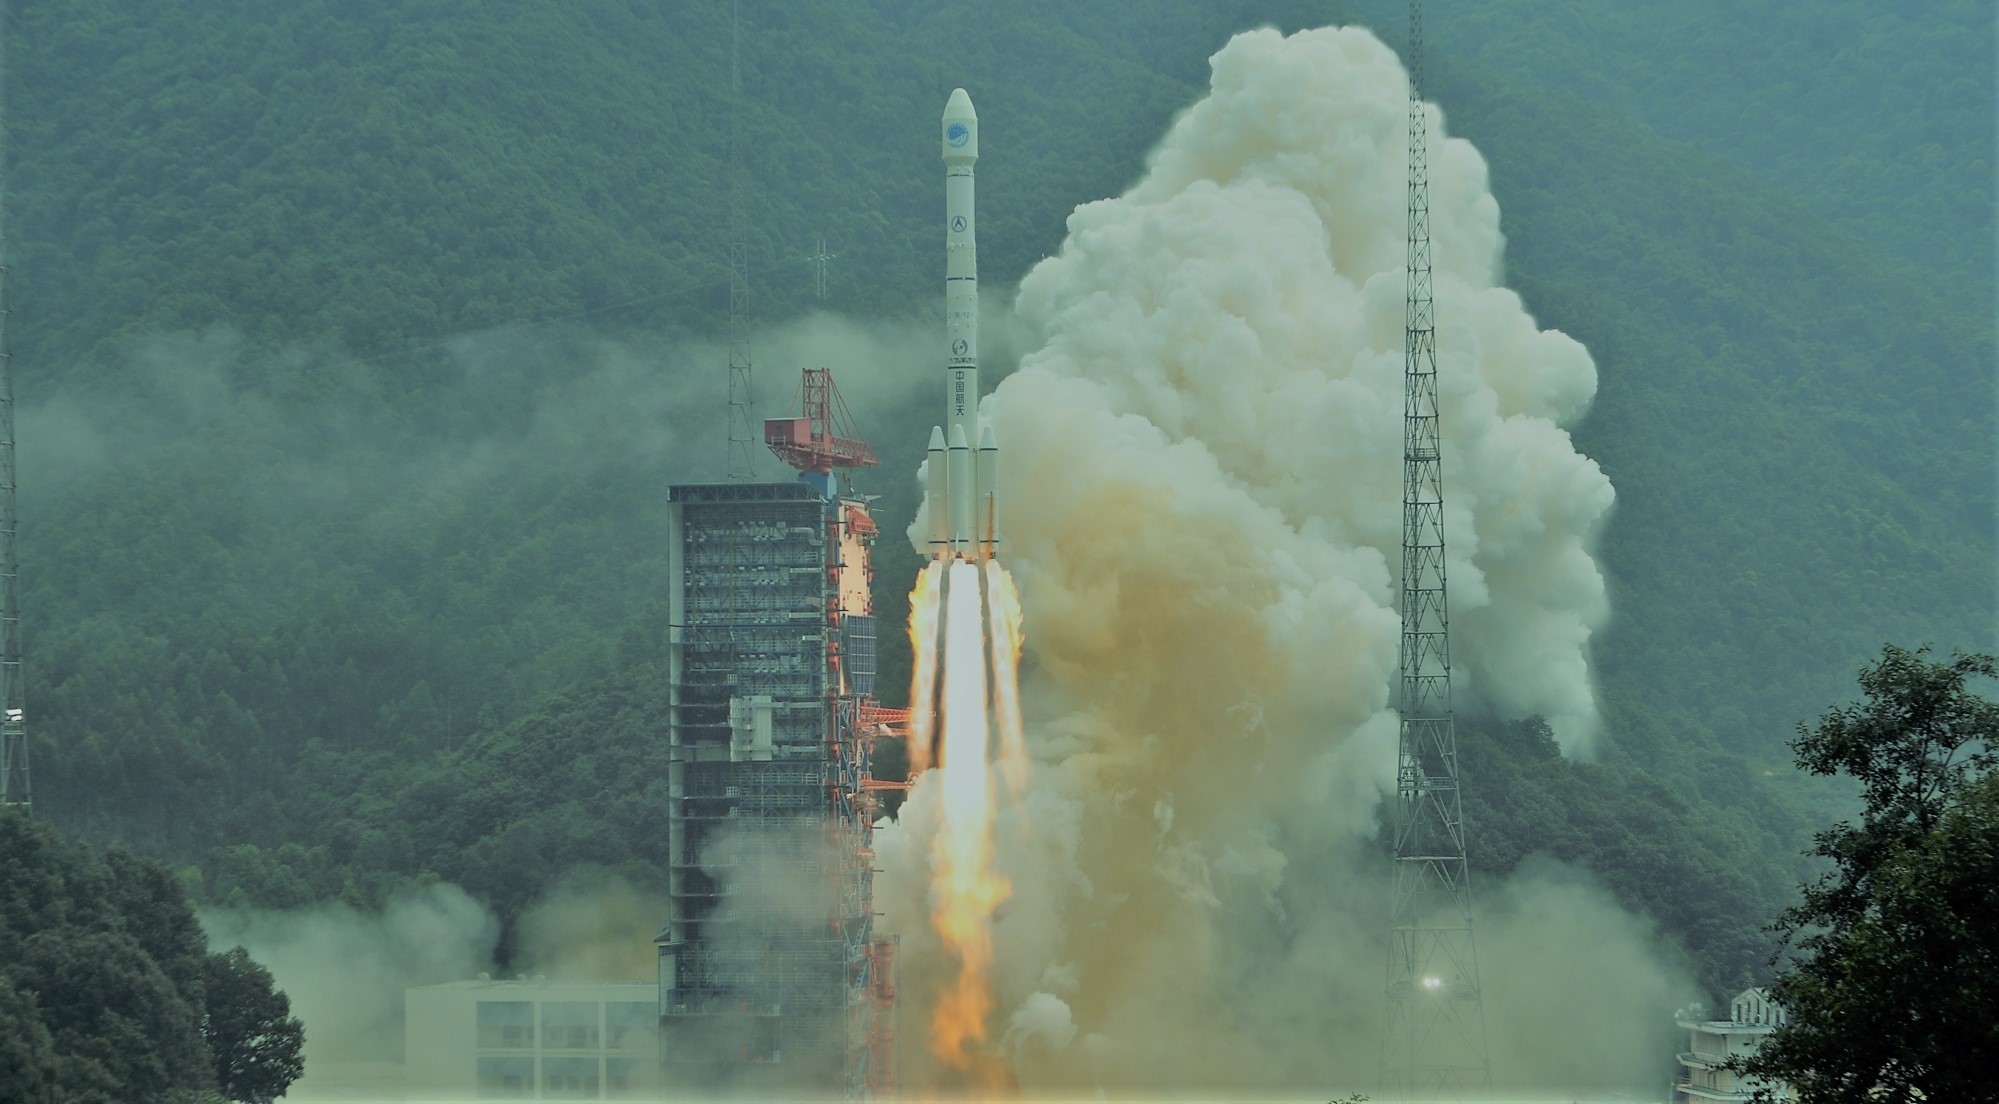 Science Roundup: Dragon teeth; China's rocket launch; SpaceX astronauts first trip